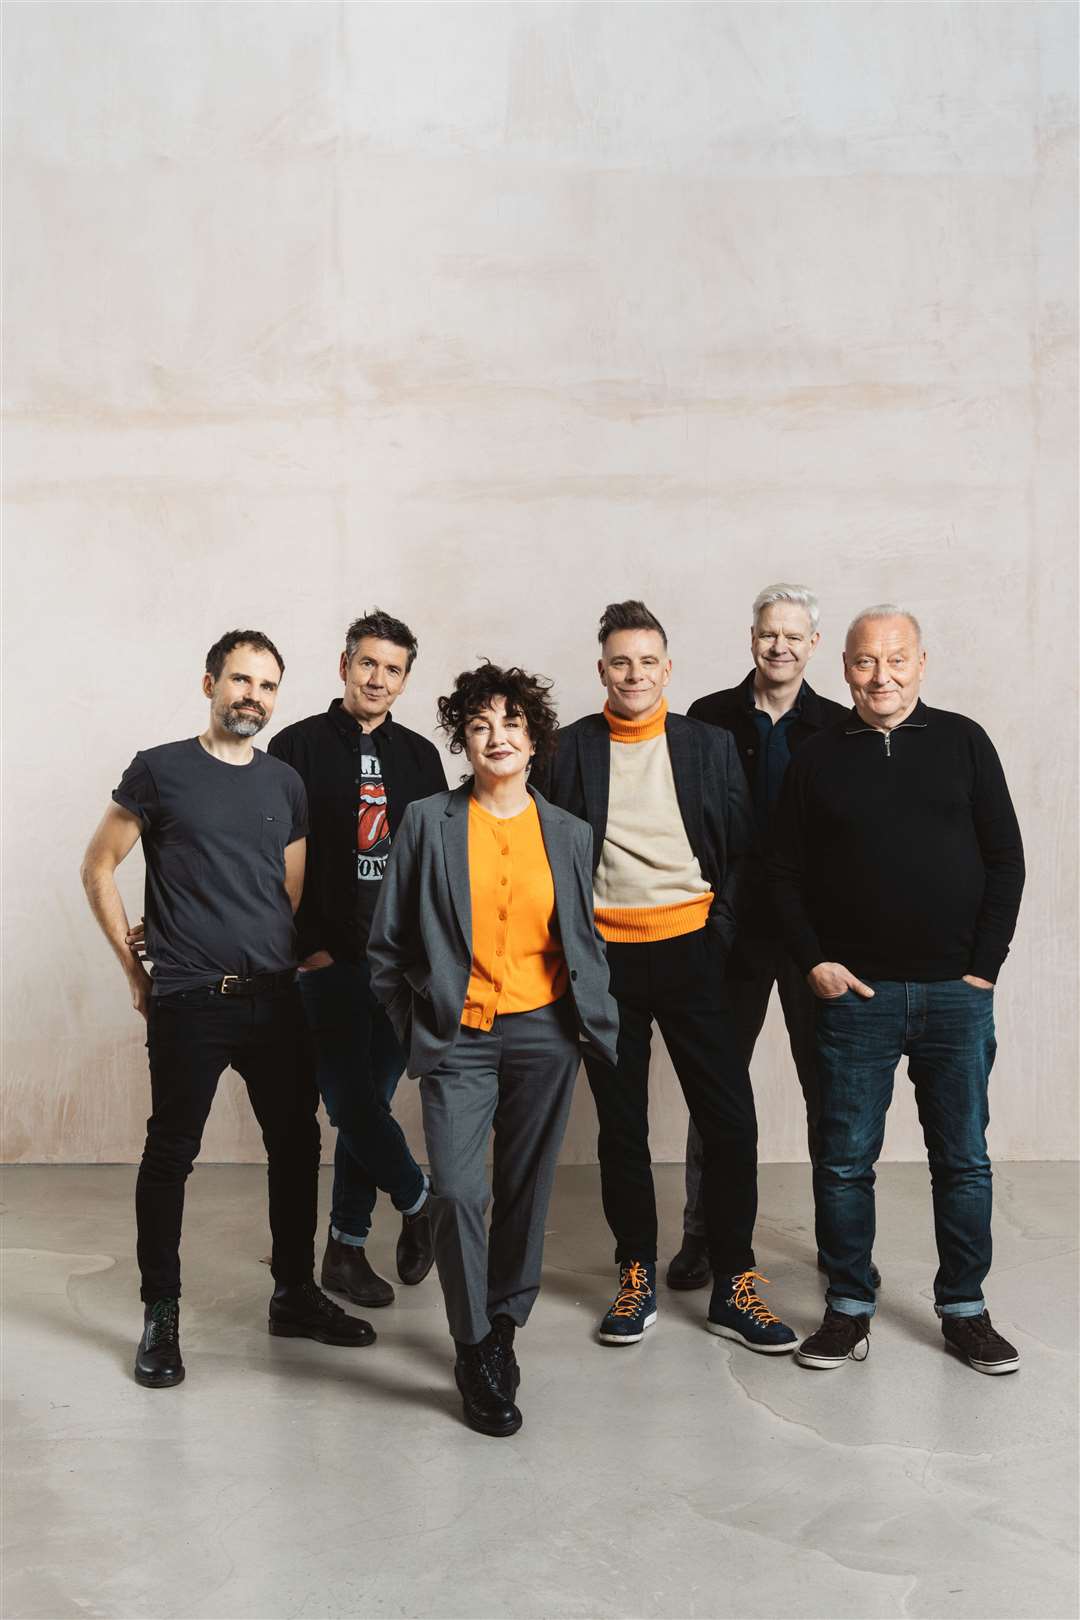 Deacon Blue will play the P&J Lve